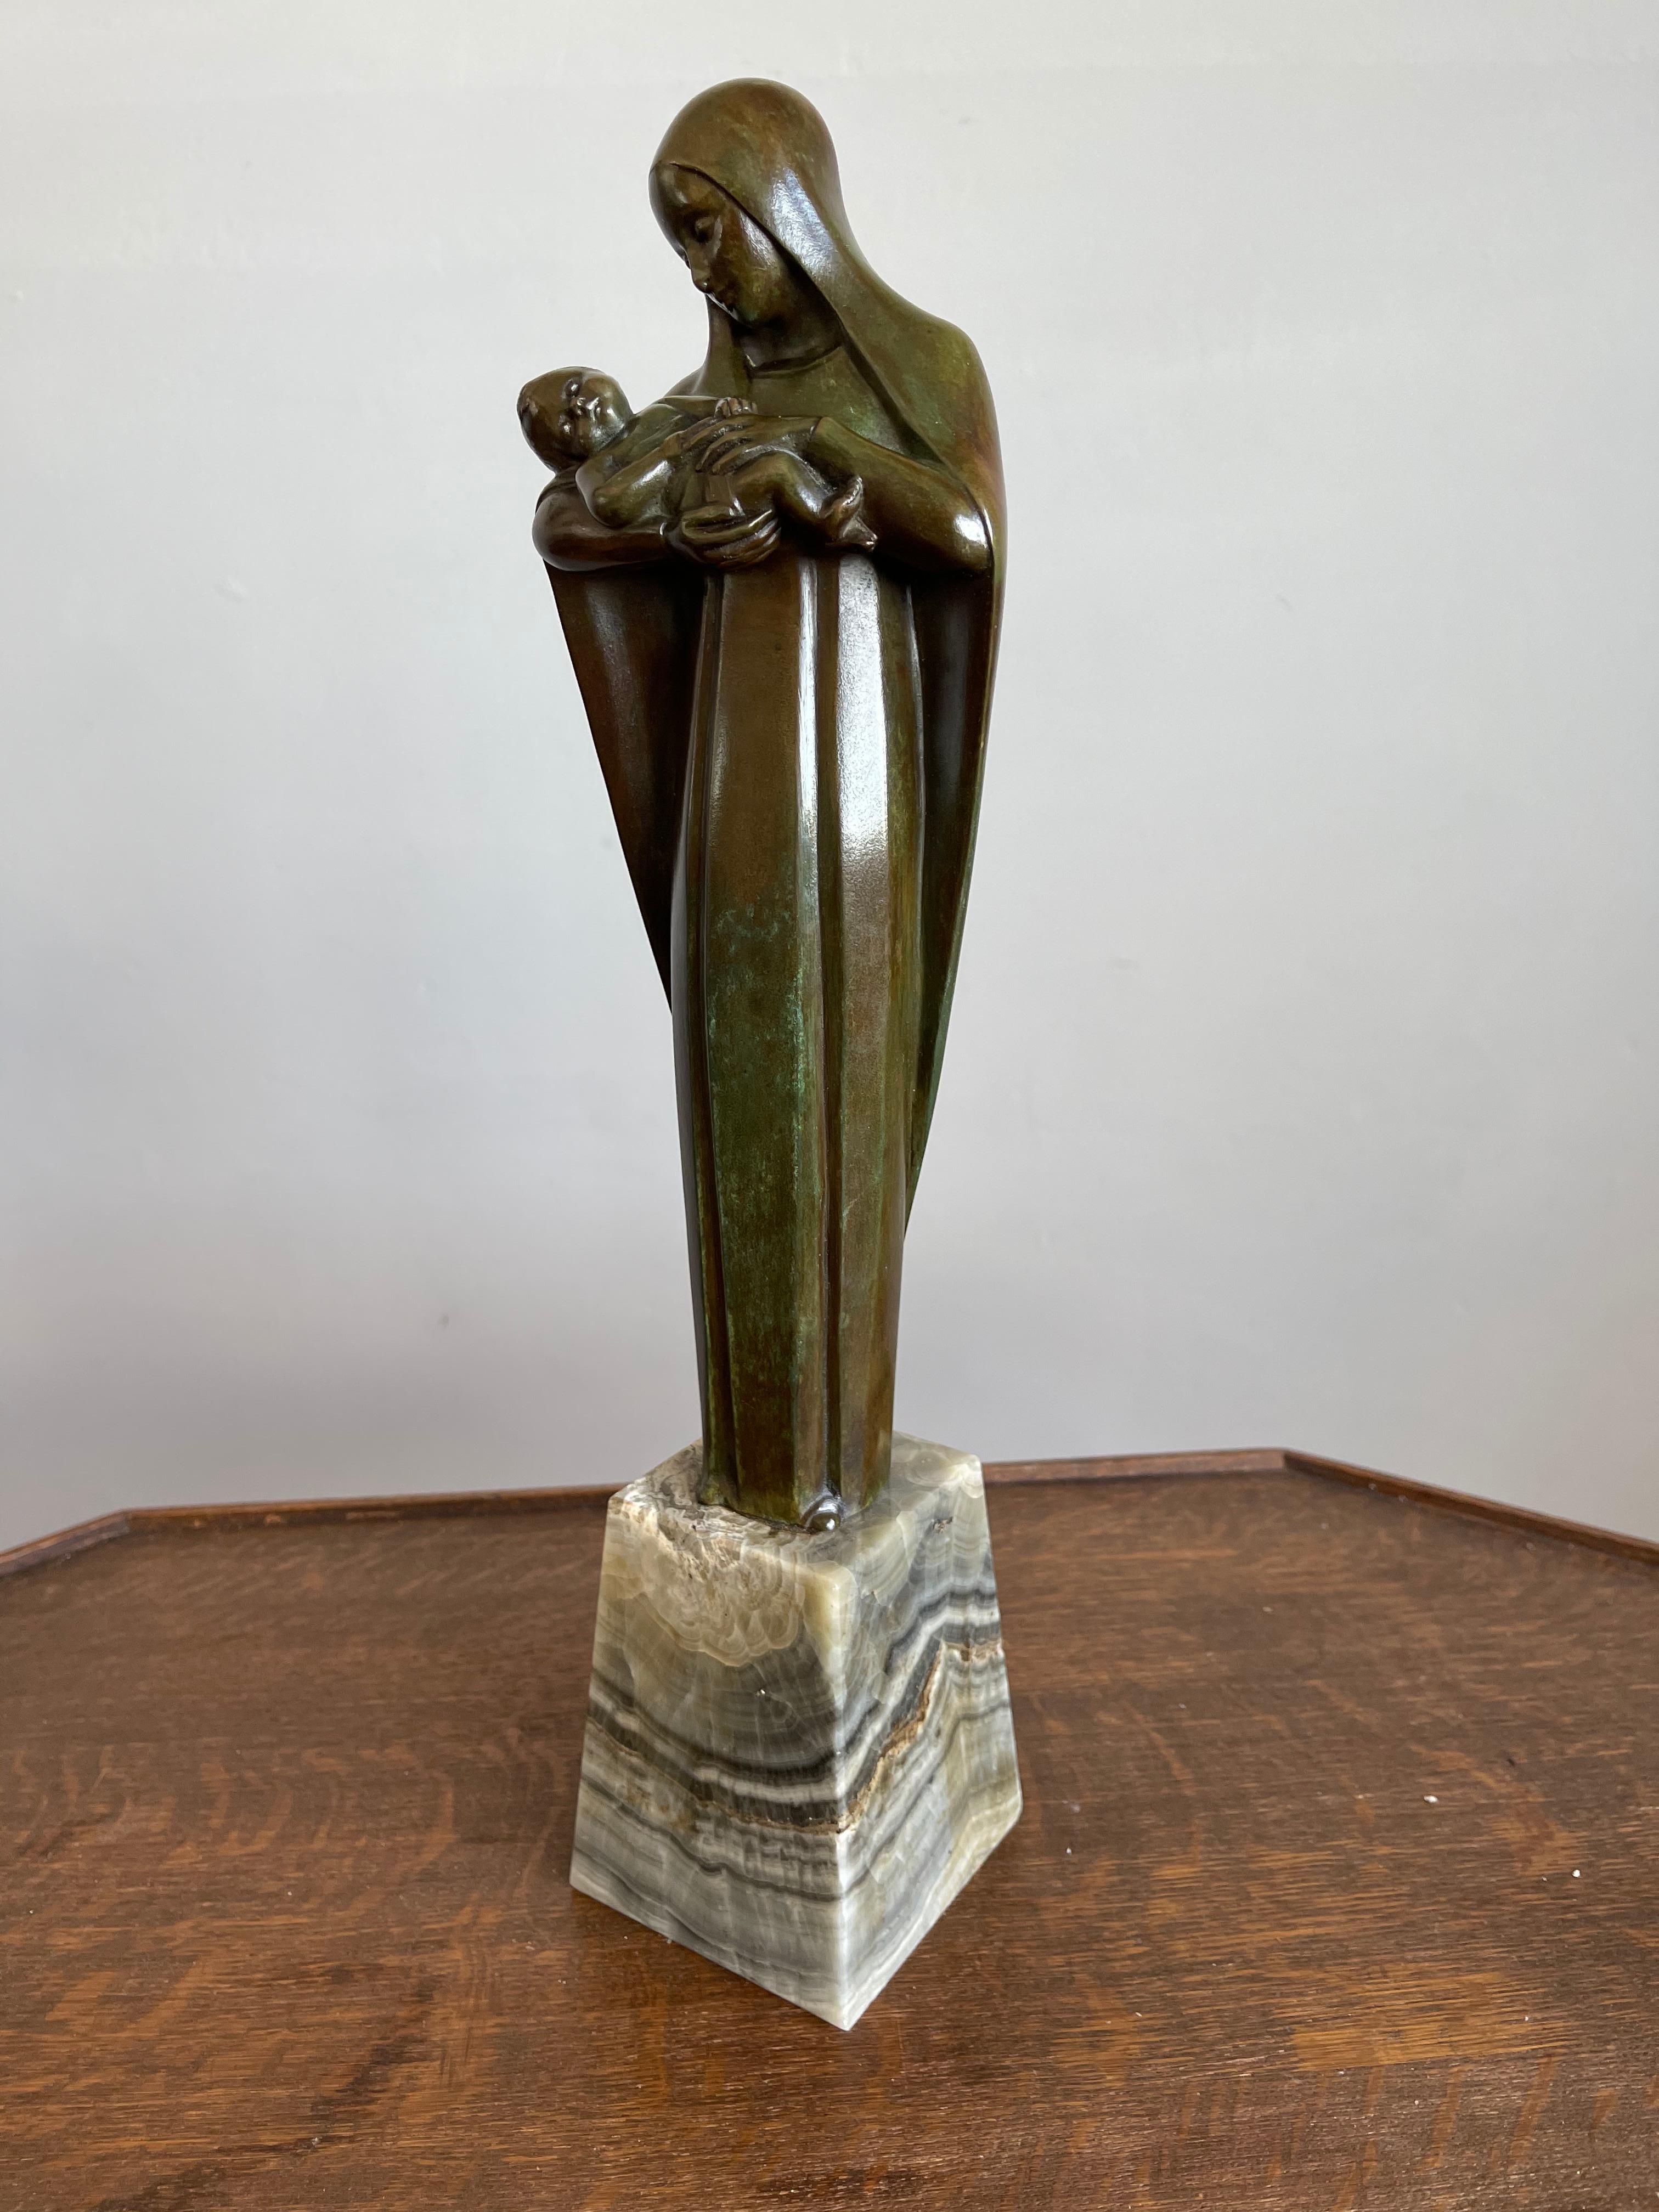 European Religious Art Deco Fine Bronze Mary and Child Sculpture Mounted on an Onyx Base